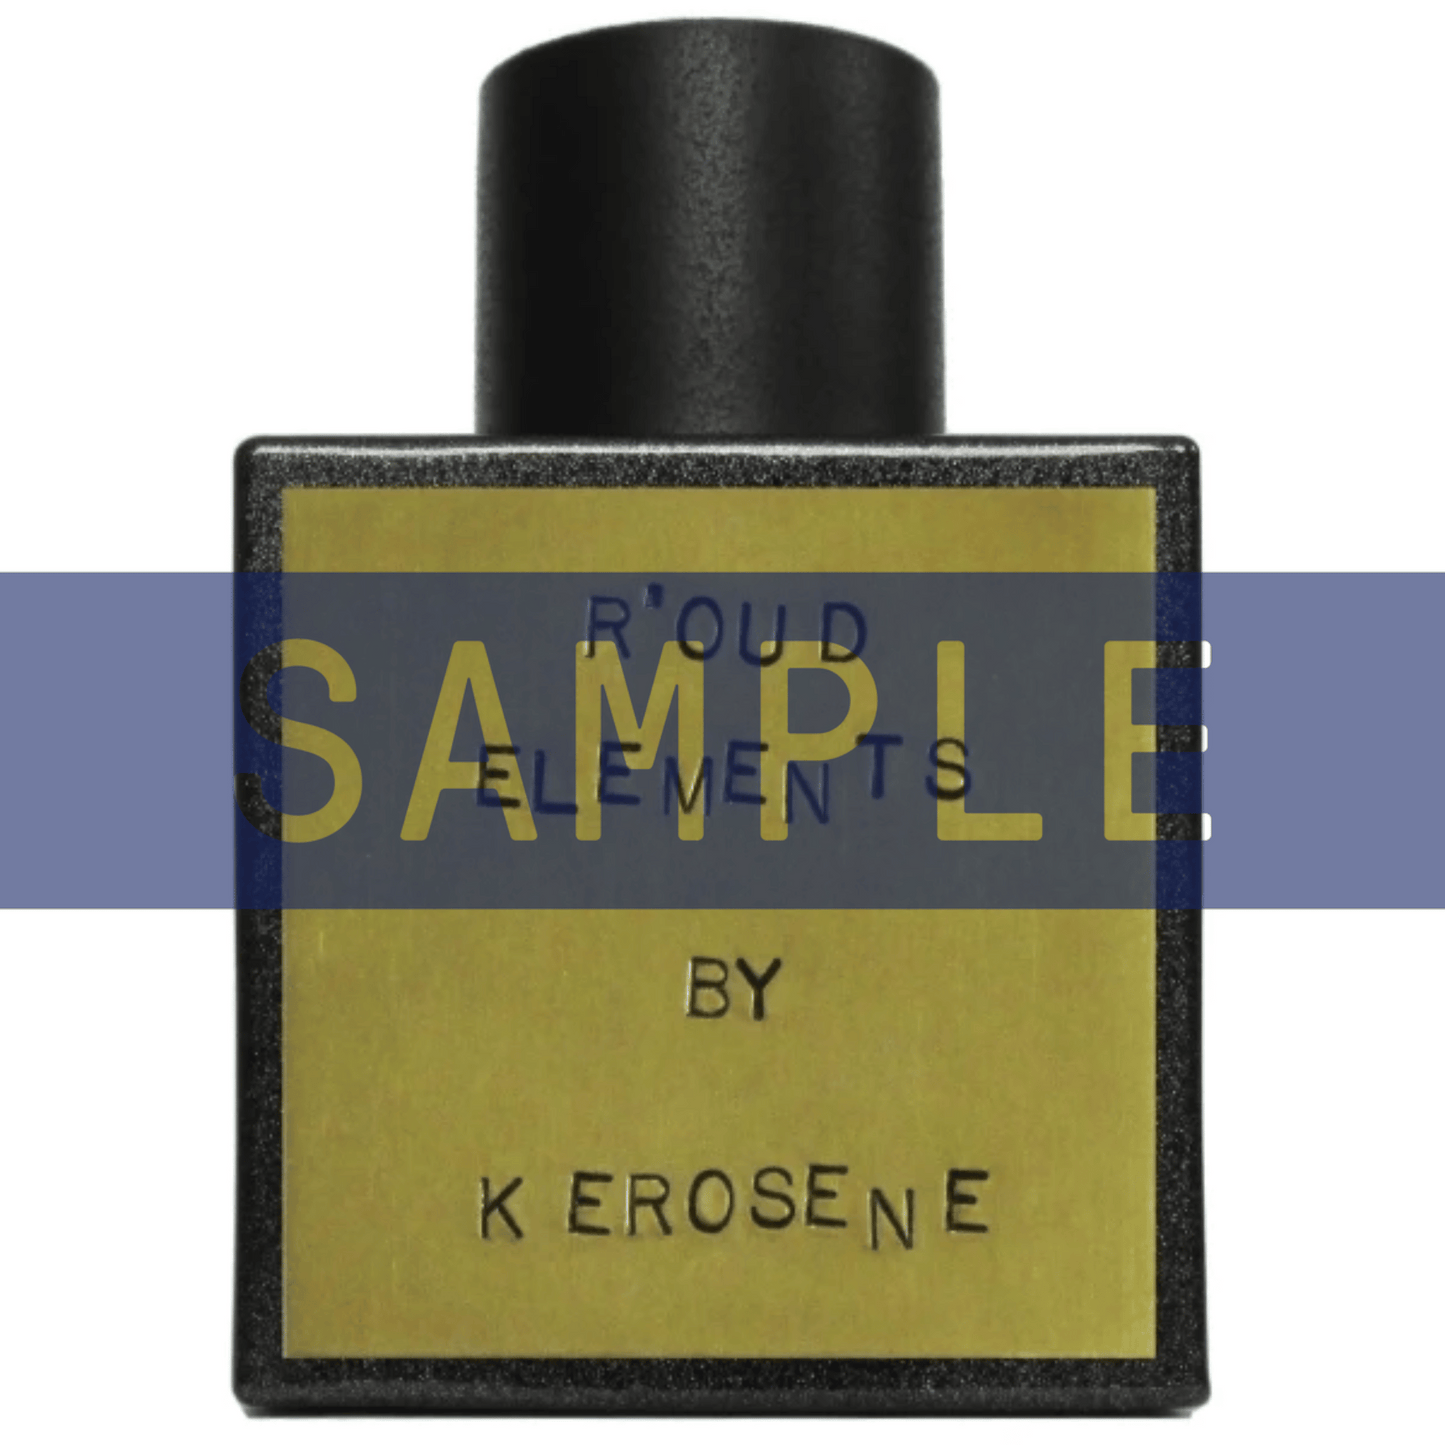 Primary Image of Sample - R'oud Elements EDP